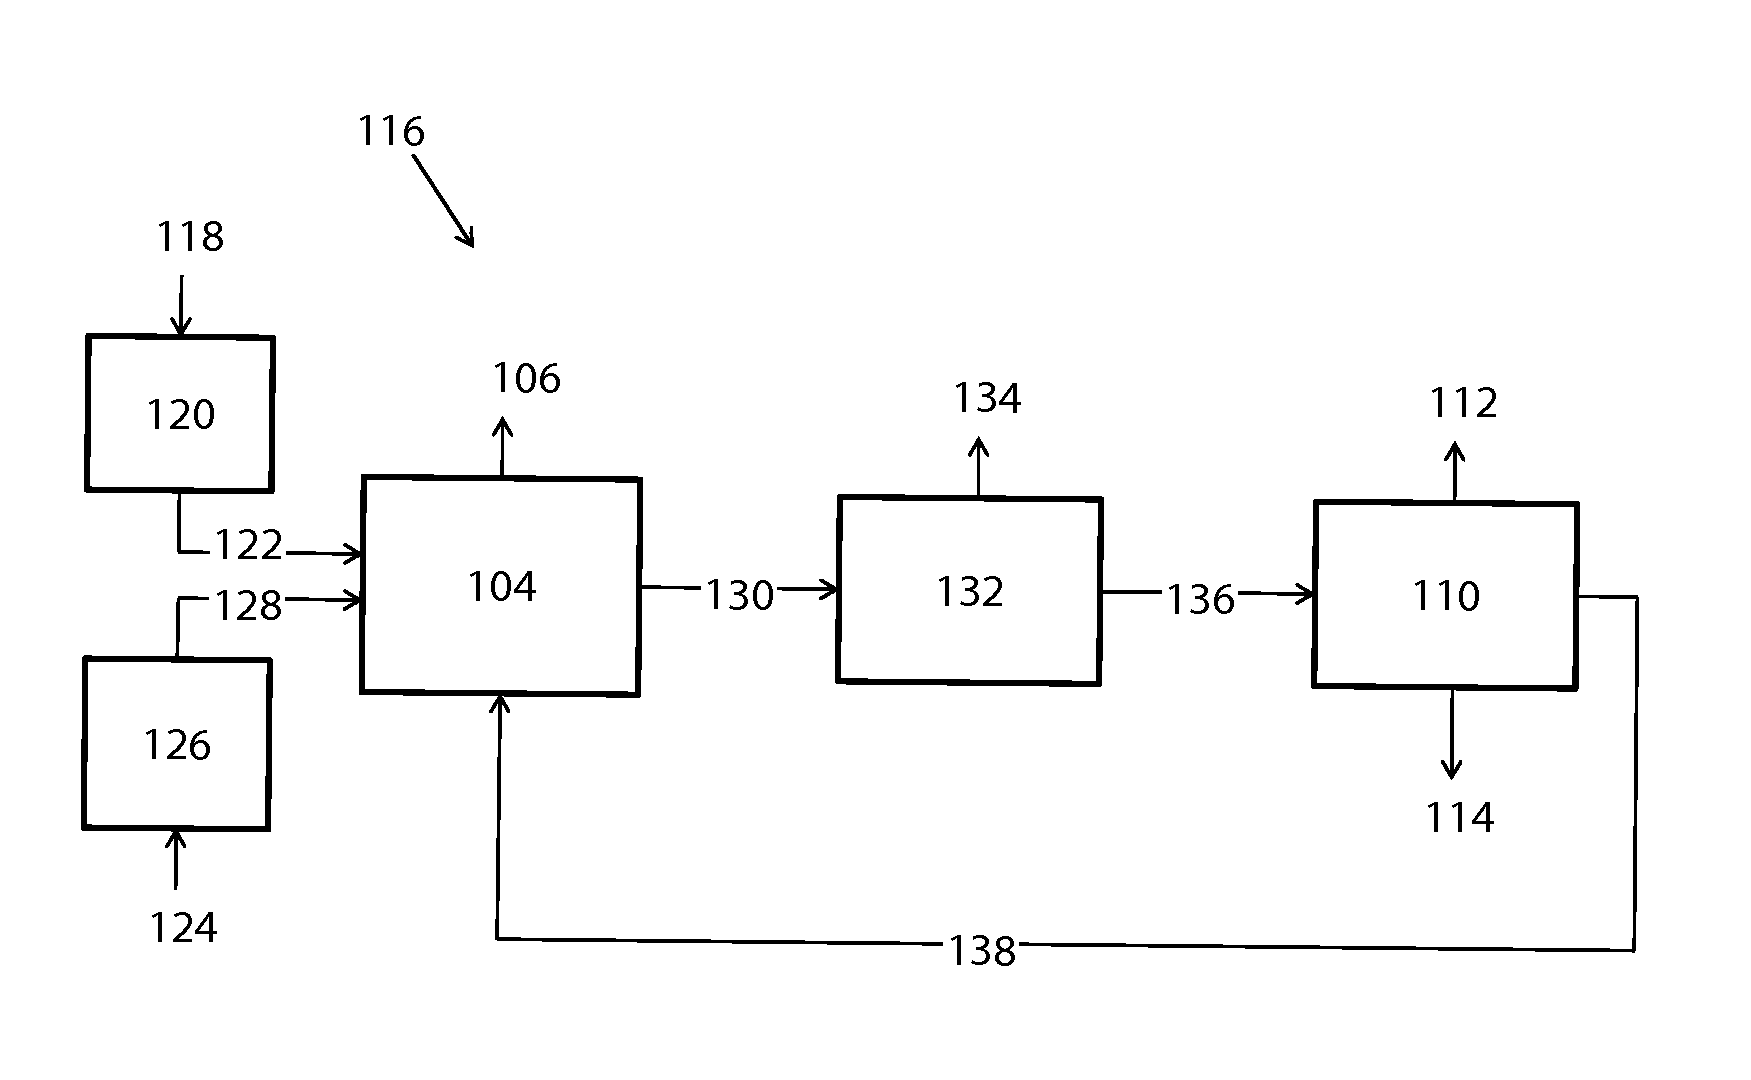 Methods of producing hydrogen and solid carbon